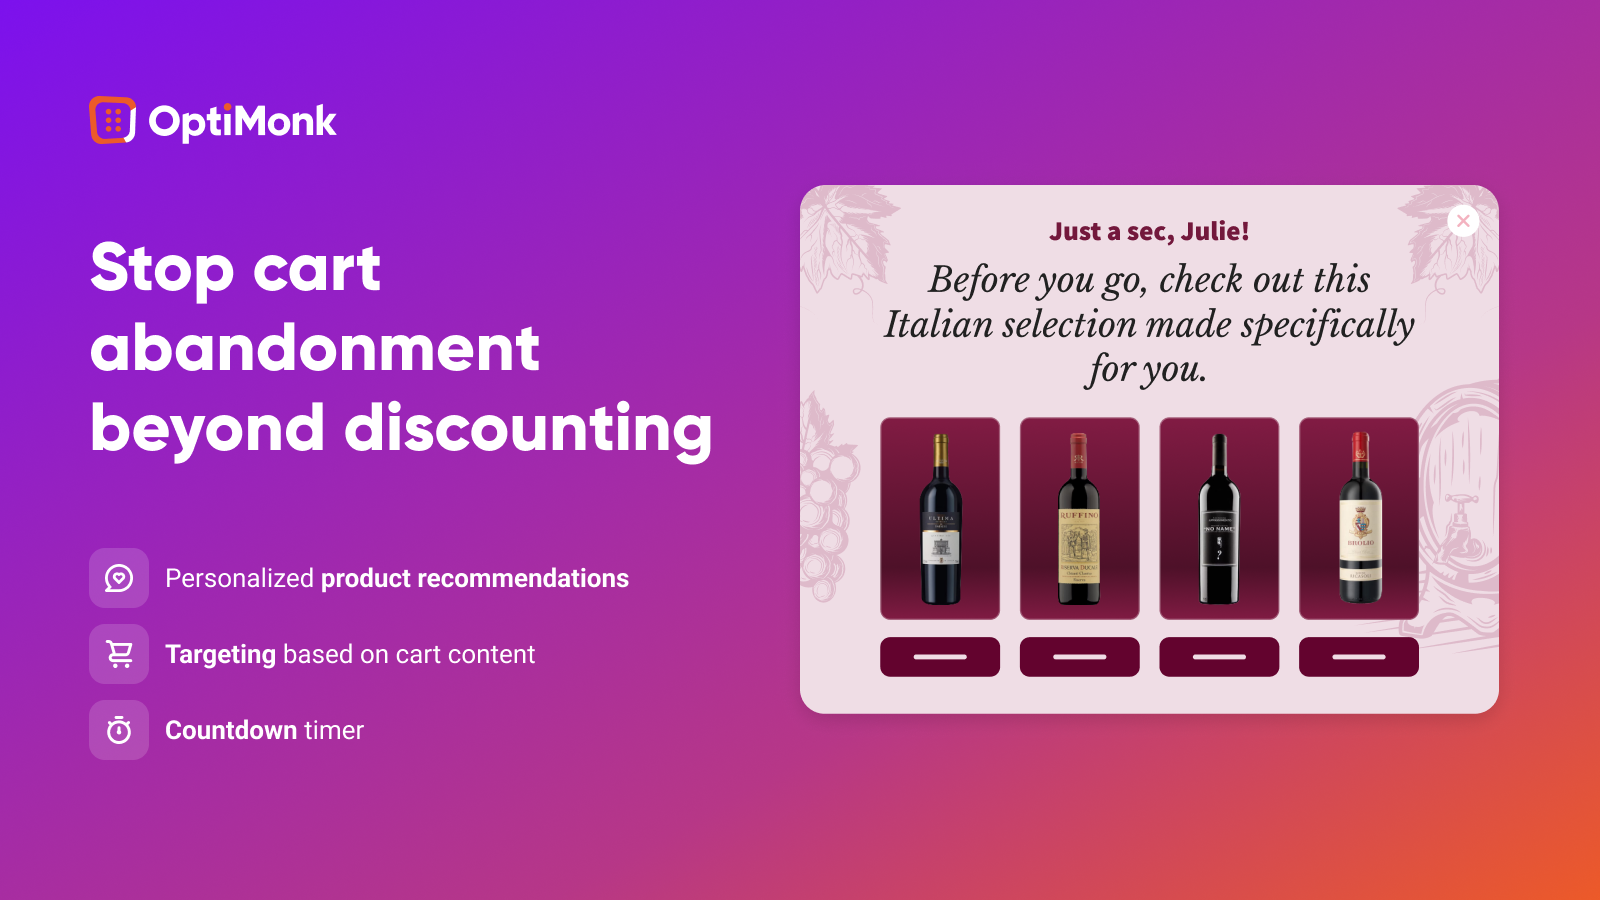 Stop abandonment without discounting by unlocking the potential in personalized popups.